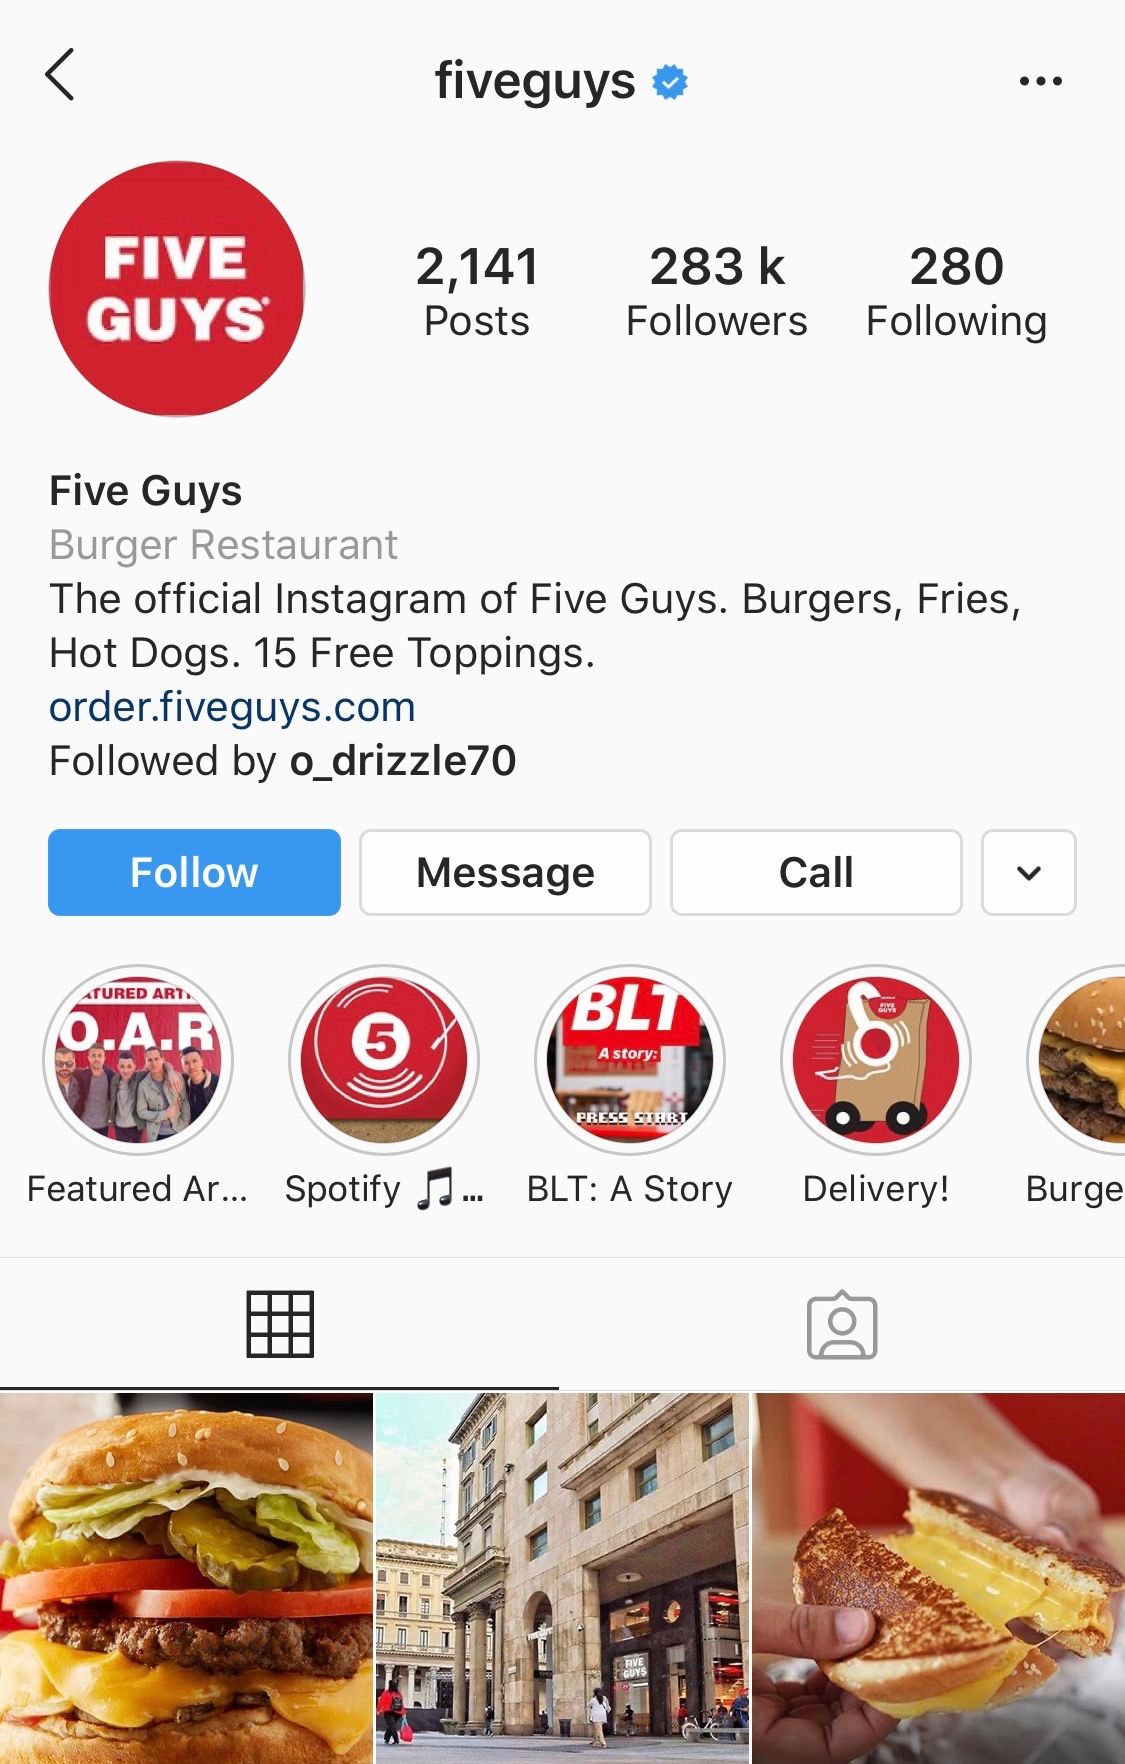 @fiveguys put their menu on their Instagram bio for total clarity